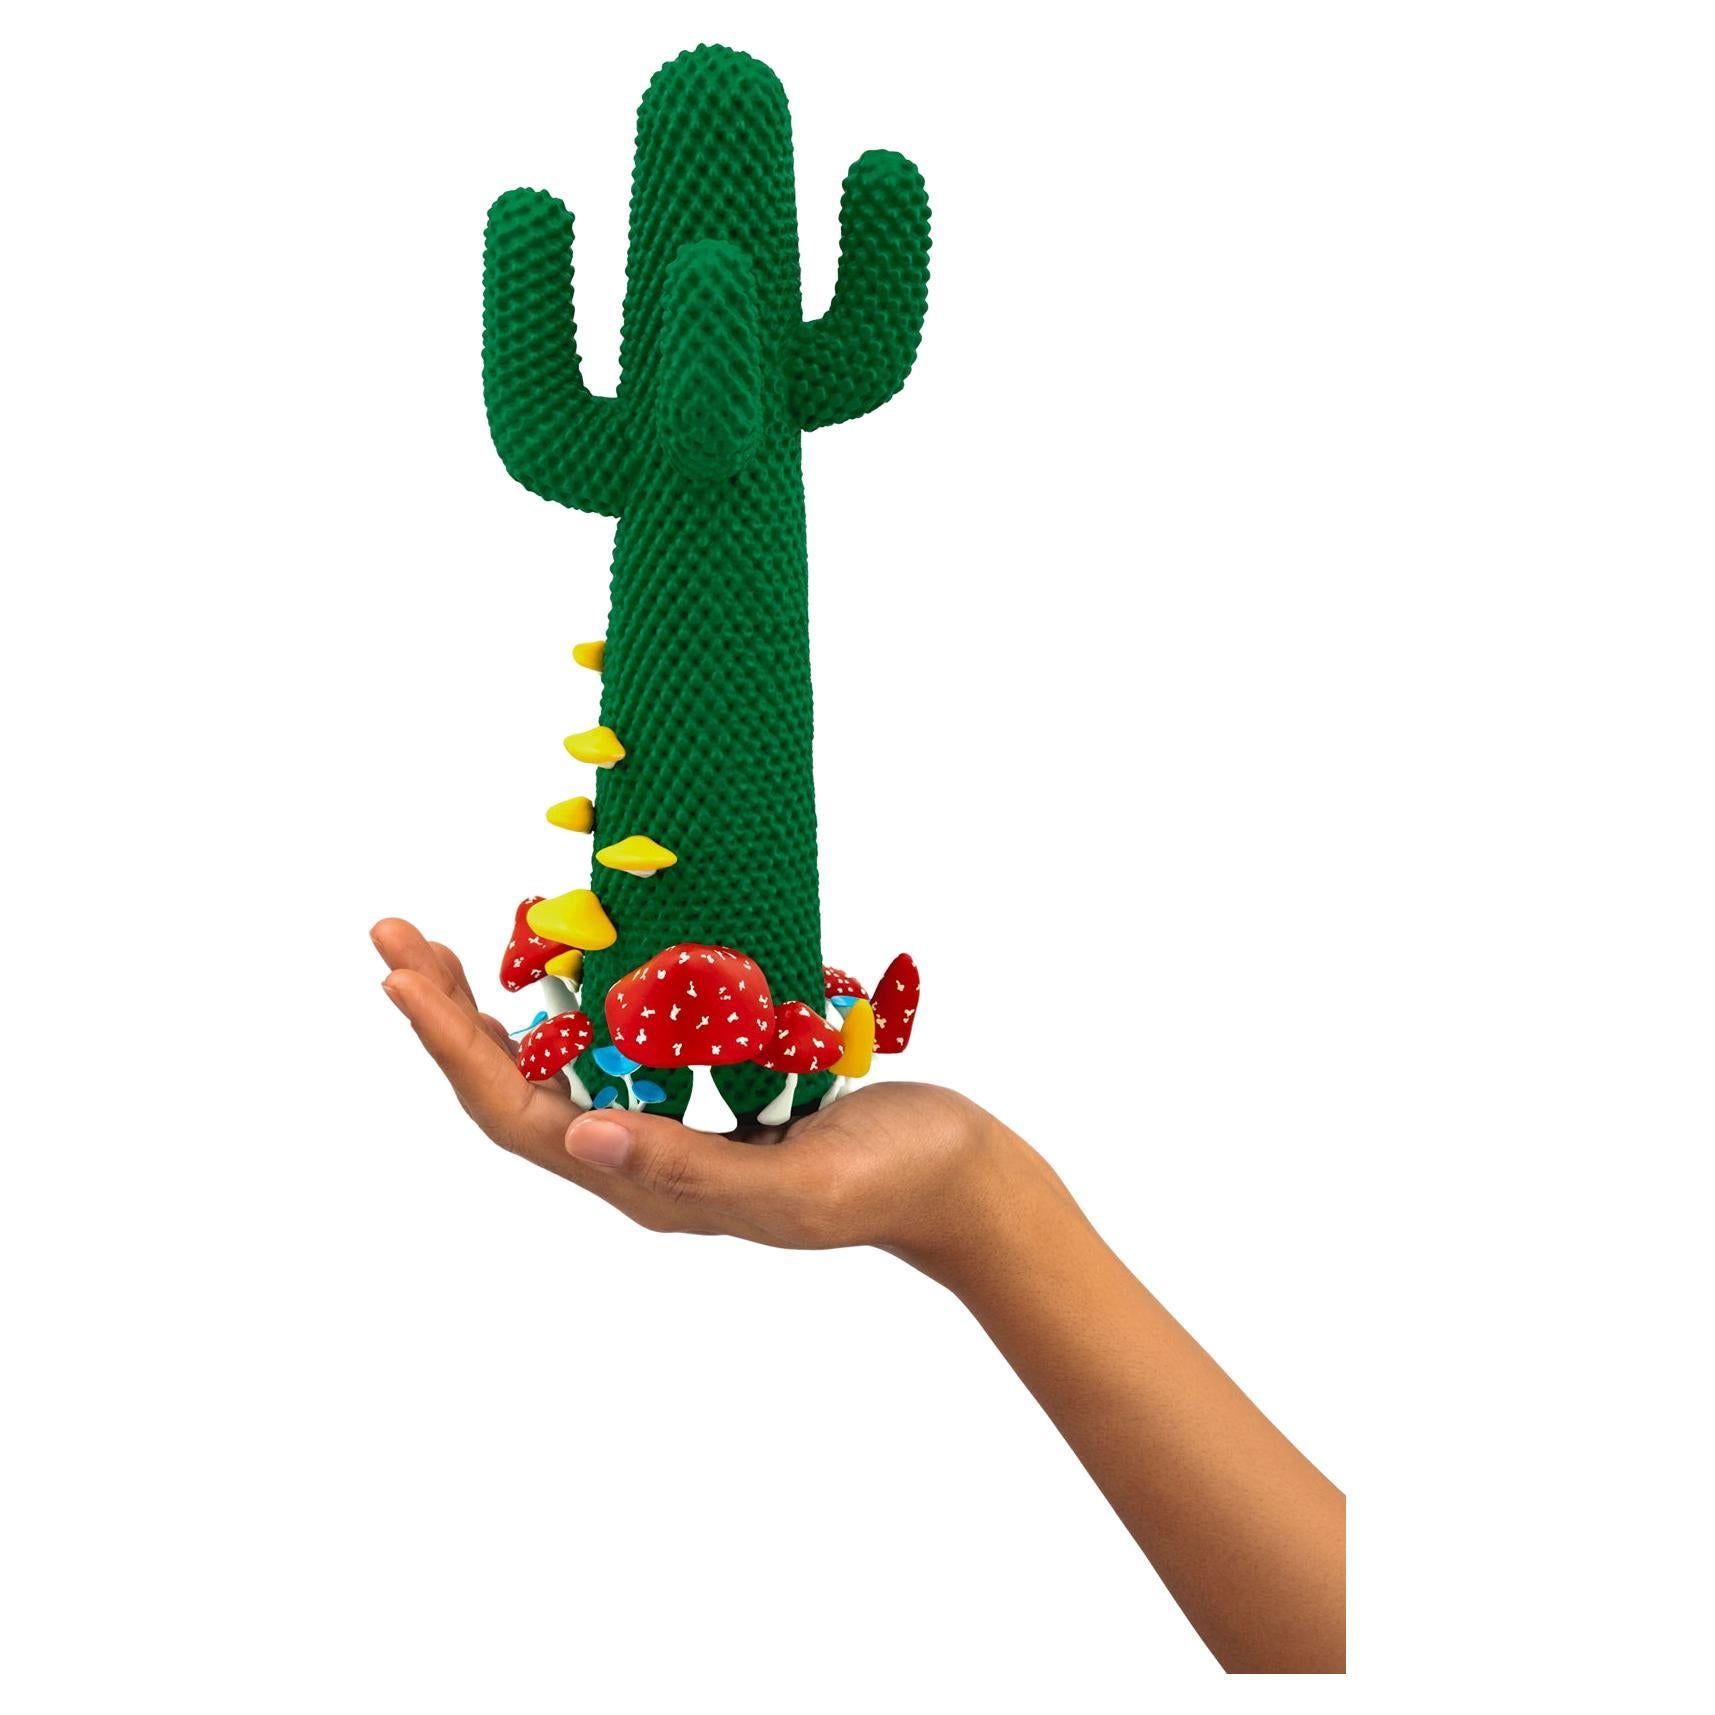 Limited Edition #77/99

Gufram presents the miniaturised version of the Shroom CACTUS® created in collaboration with A$AP Rocky and the artist’s new design studio HOMMEMADE Exactly as the real-size Shroom CACTUS®, the new Guframini piece features